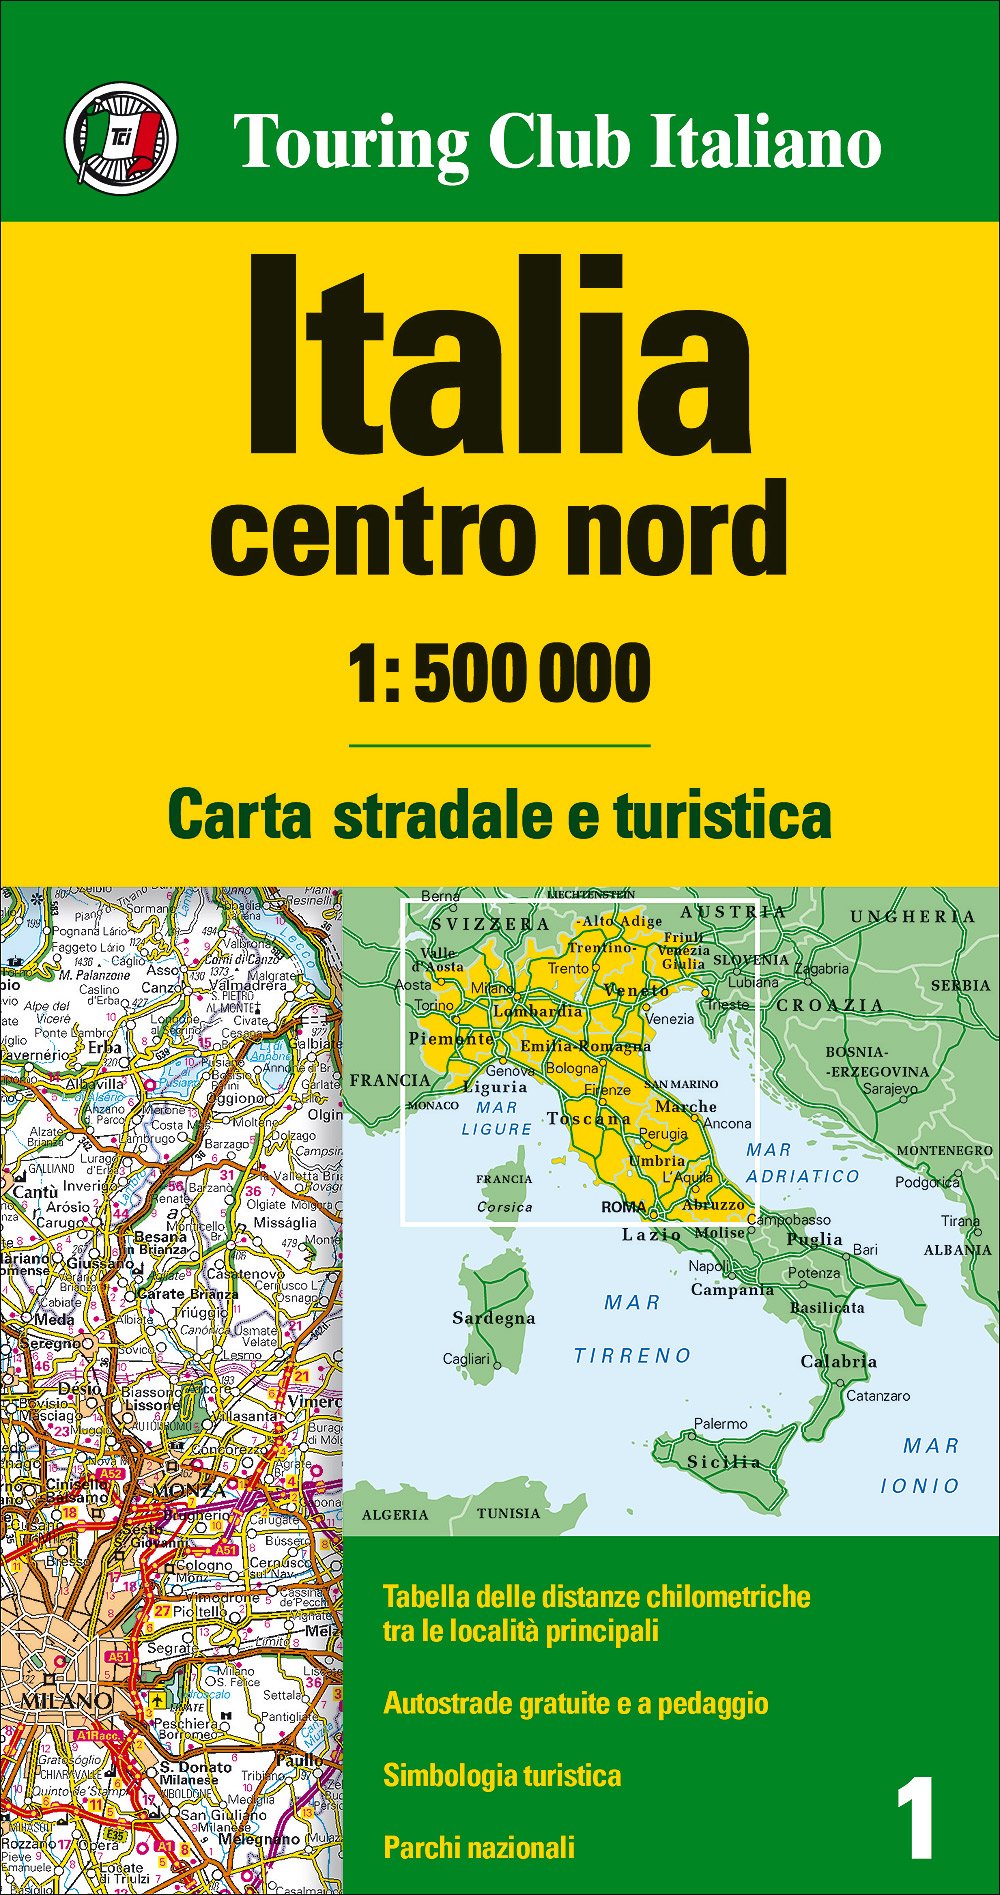 Northern and Central Italy - 1:500,000- 2022 edi